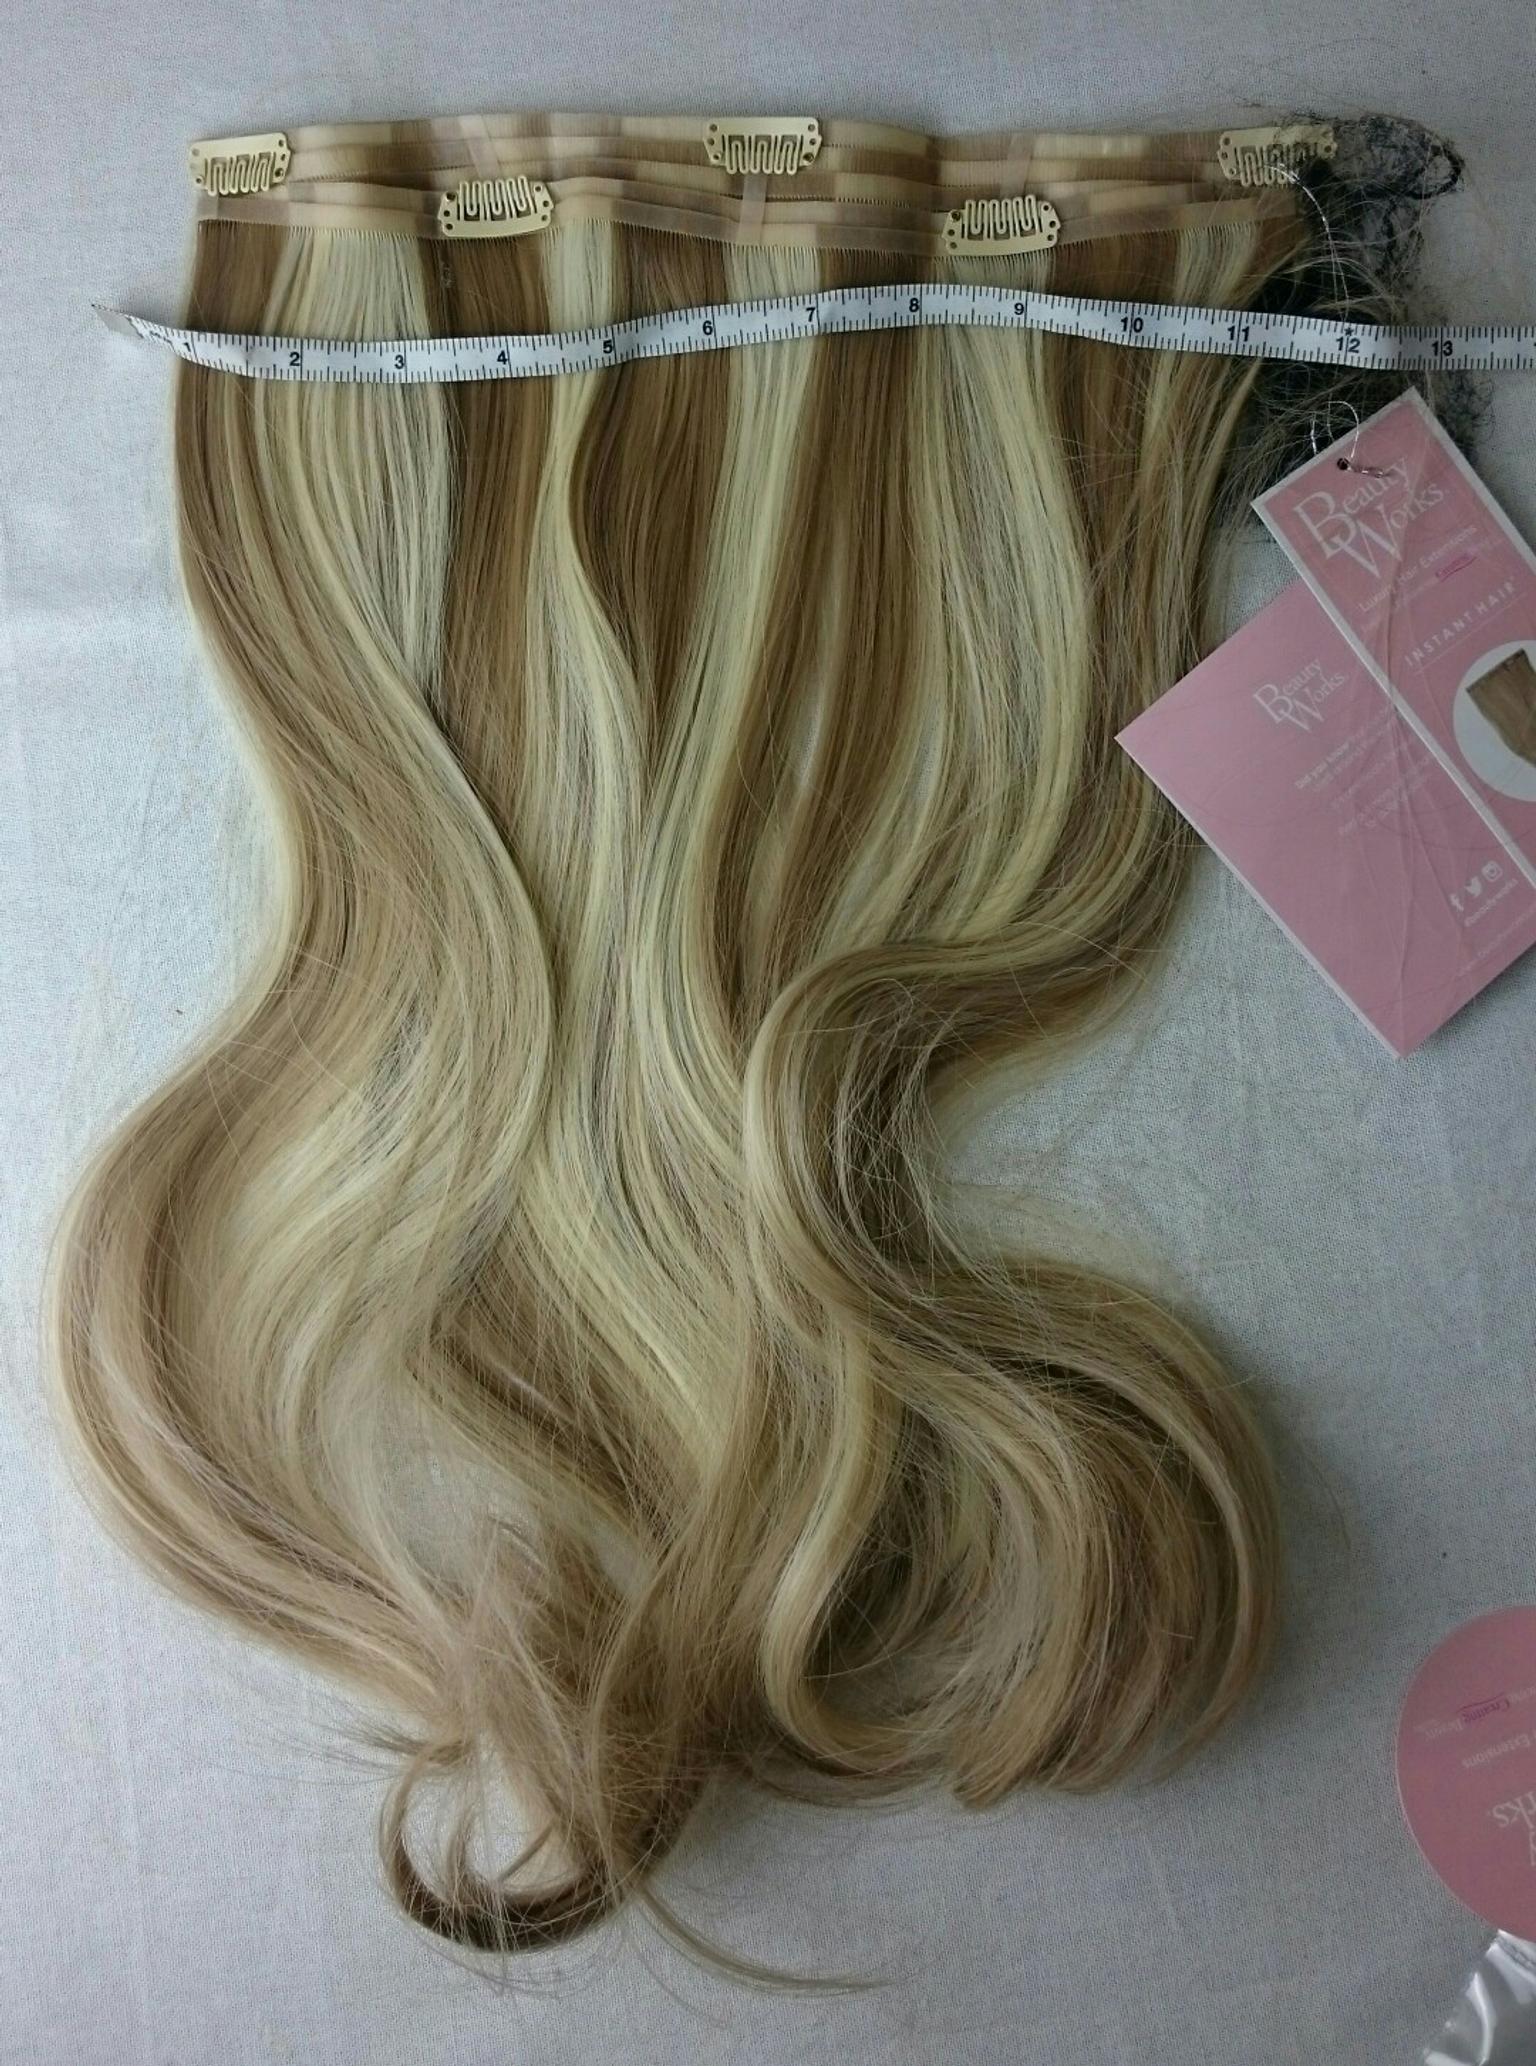 Beauty Works Instant Hair 20 Dirty Blonde In M6 Salford For 100 00 For Sale Shpock